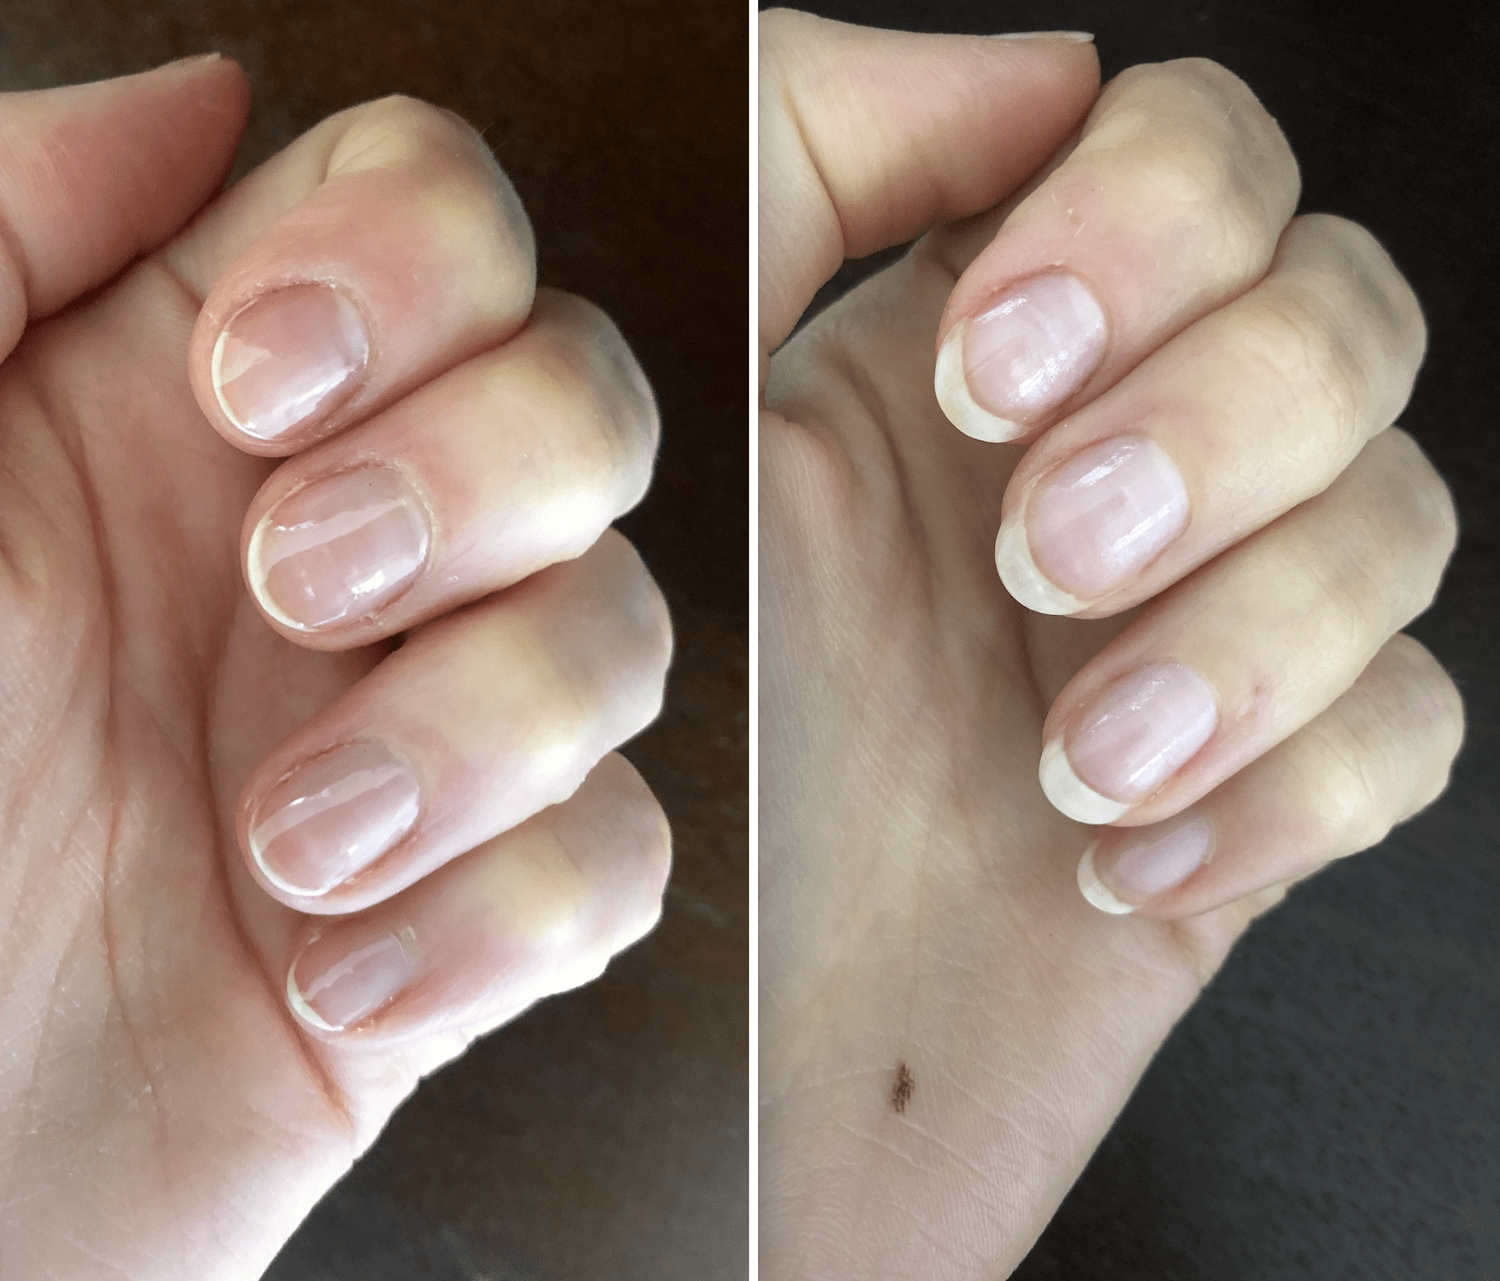 Growing Out Healthy Nails After Years of Biting? | ThriftyFun